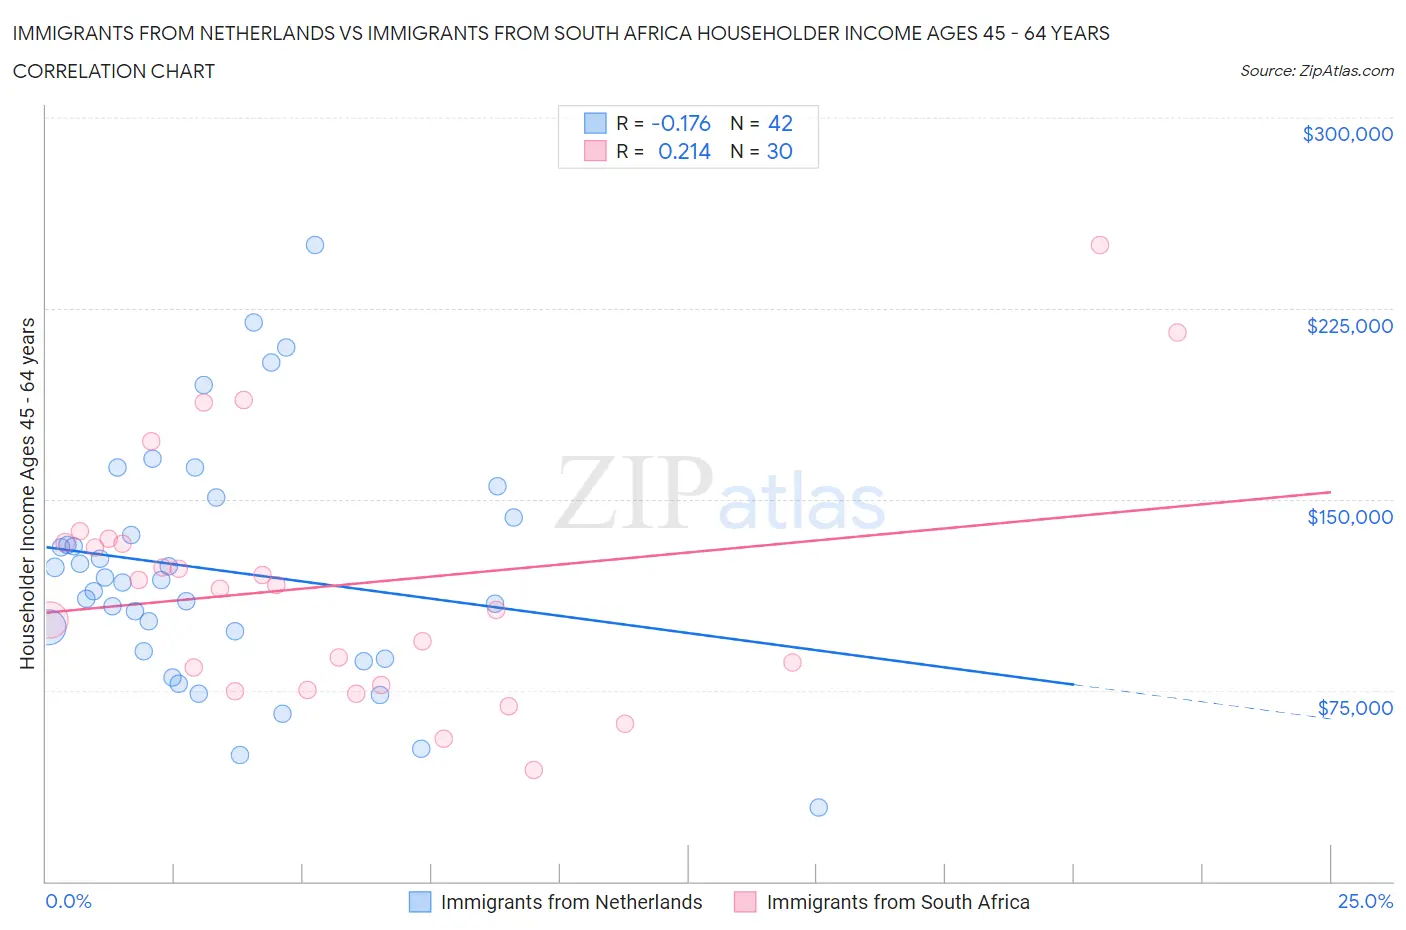 Immigrants from Netherlands vs Immigrants from South Africa Householder Income Ages 45 - 64 years